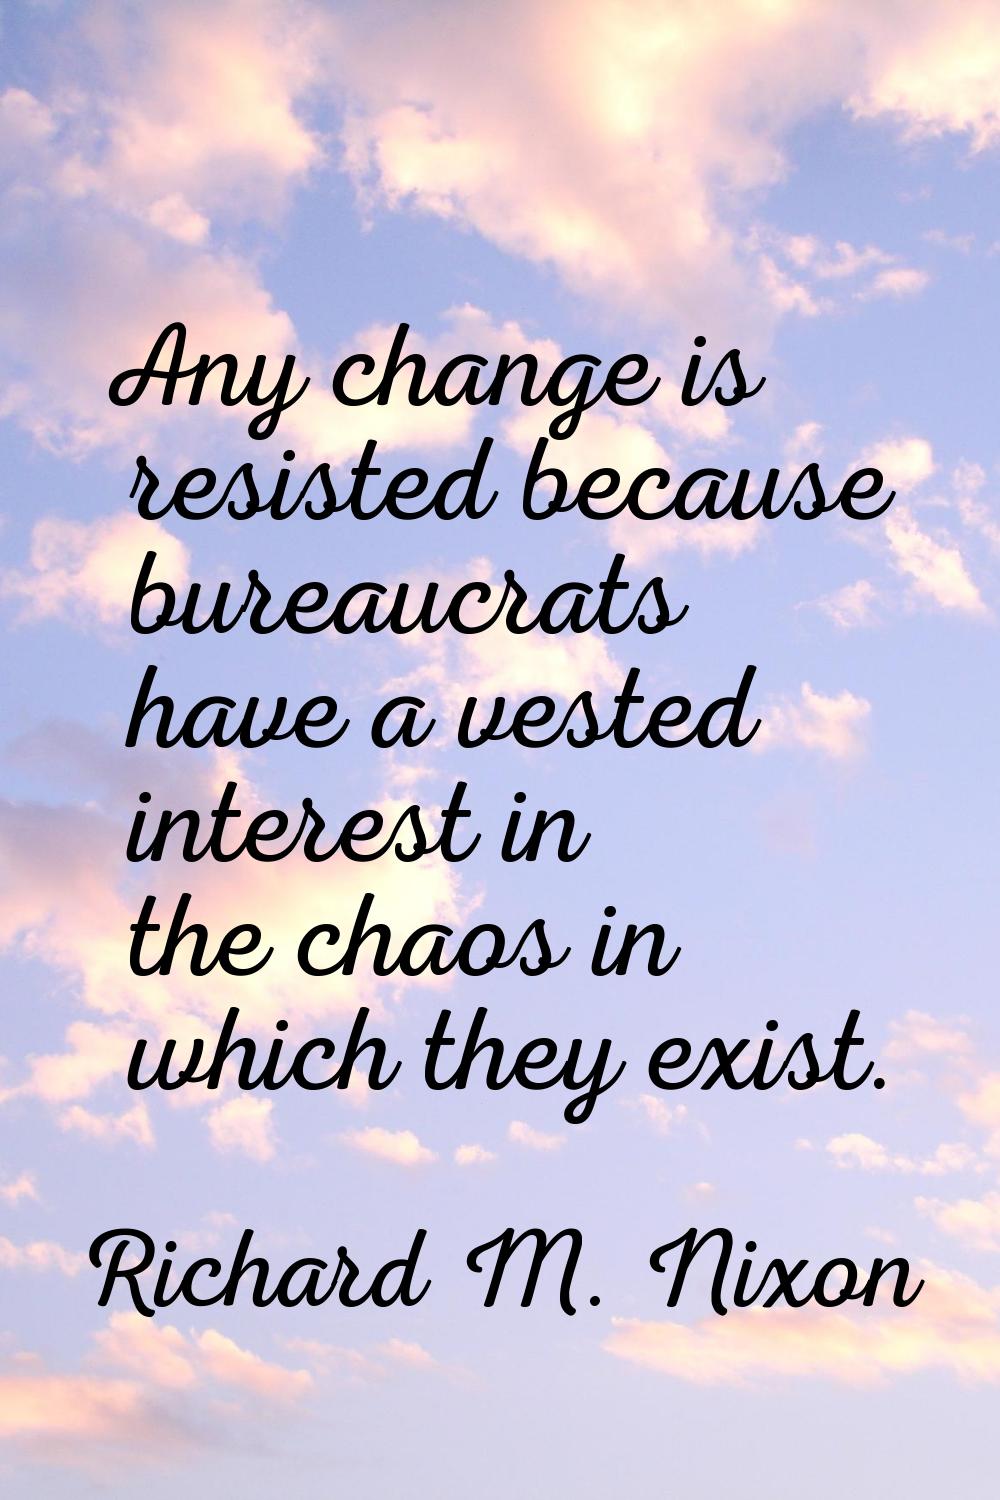 Any change is resisted because bureaucrats have a vested interest in the chaos in which they exist.